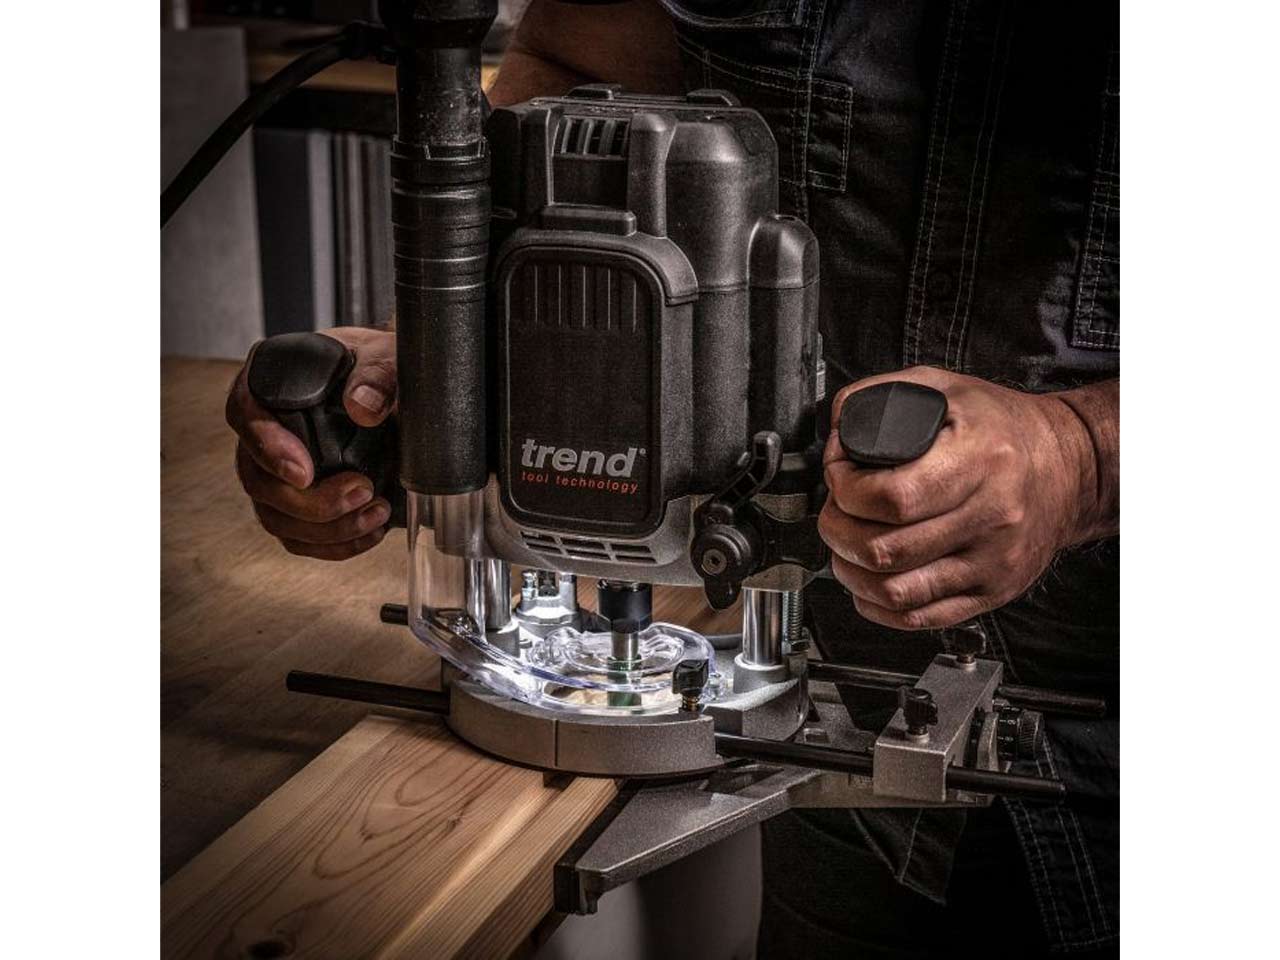 Trend T12ELK 110v 2300W 1/2in Variable Speed Plunge Router